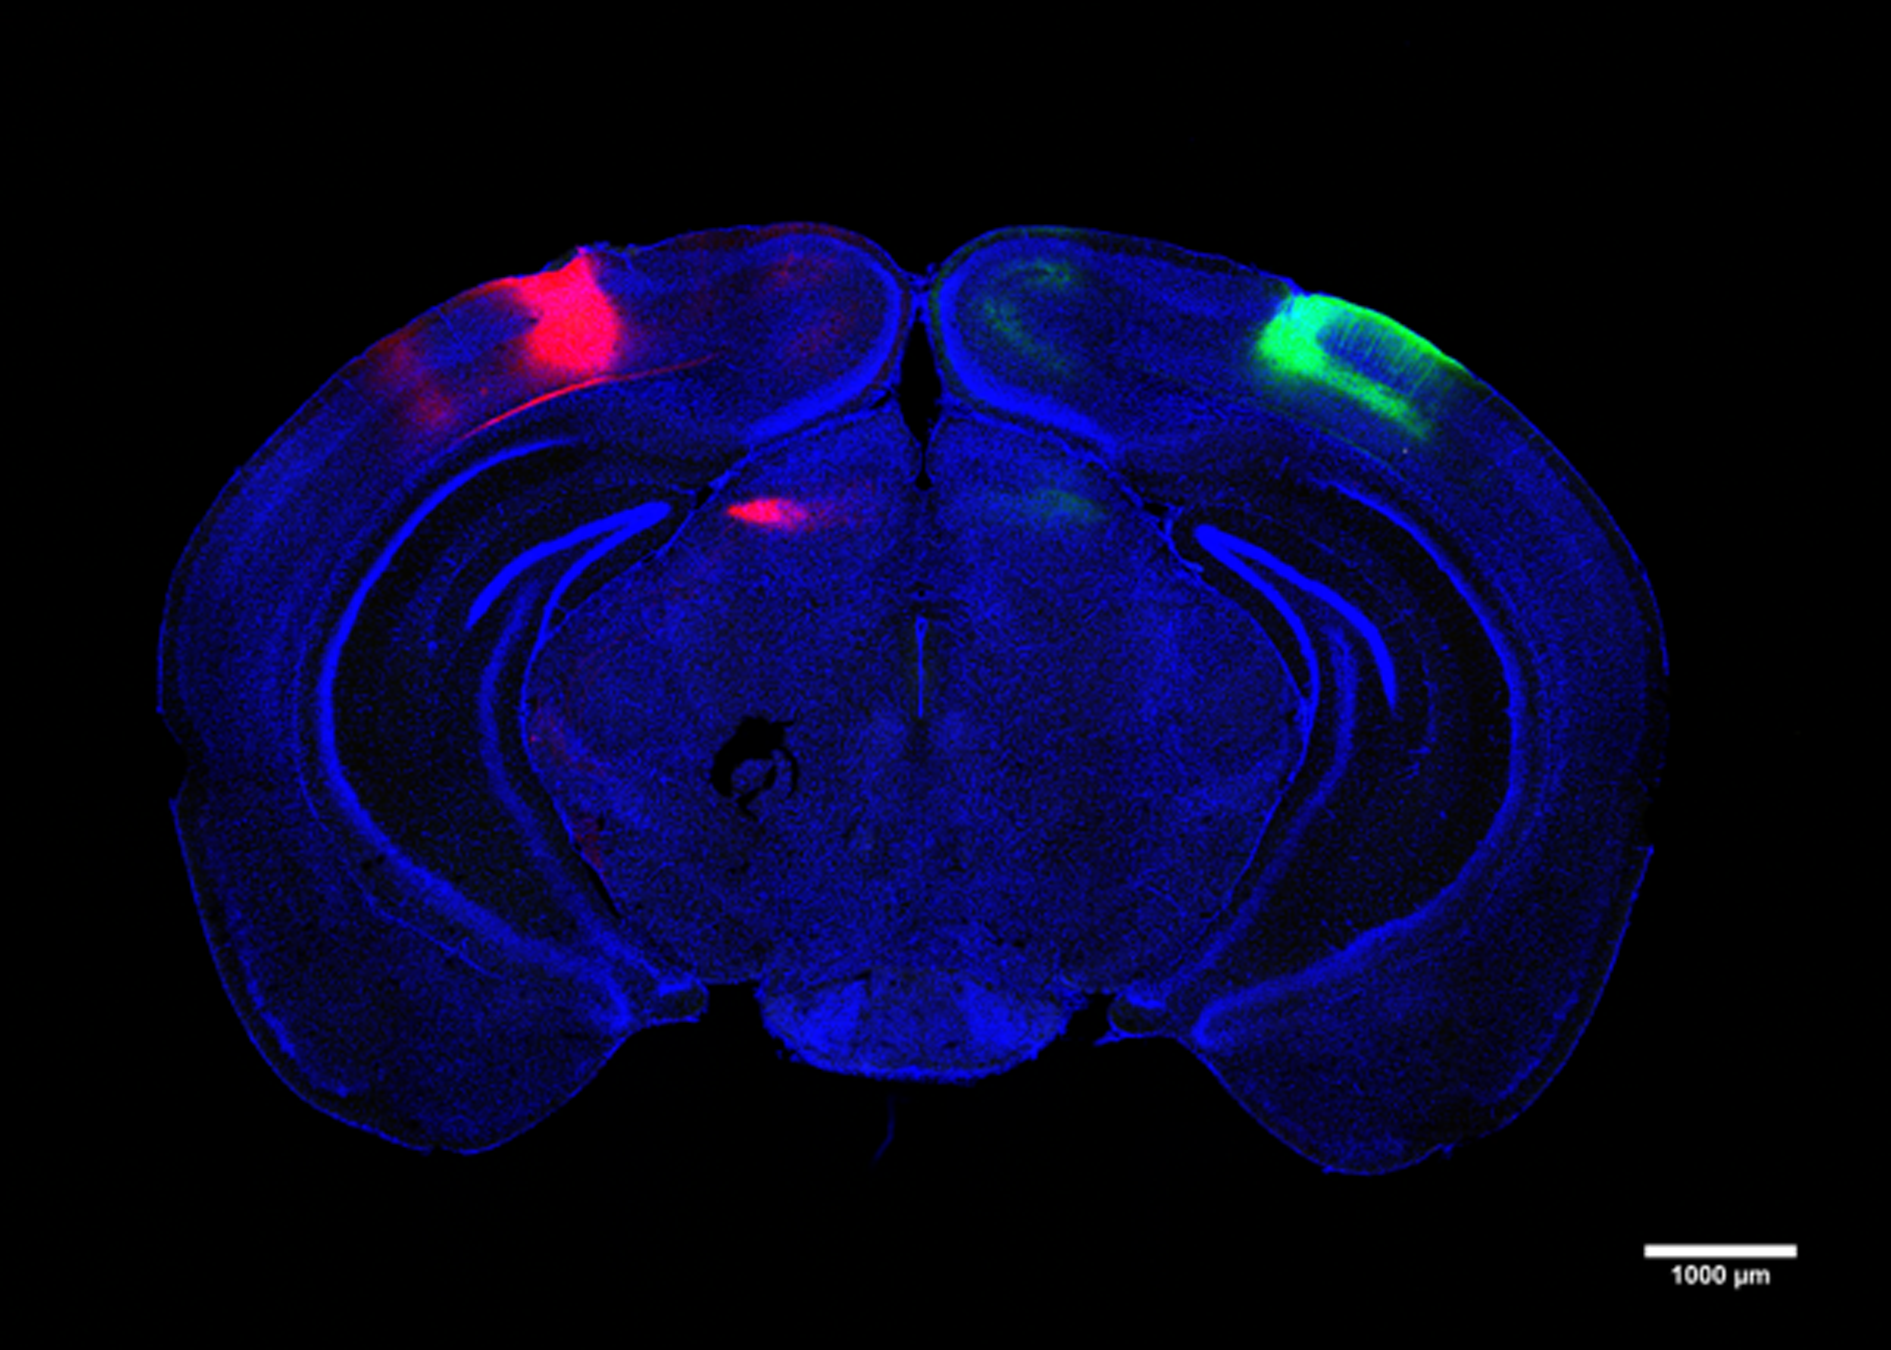 A coronal (ear to ear) cross-section of a mouse brain on a black backround shows the entire brain in blue except a red area on the top left and a green area on the top right